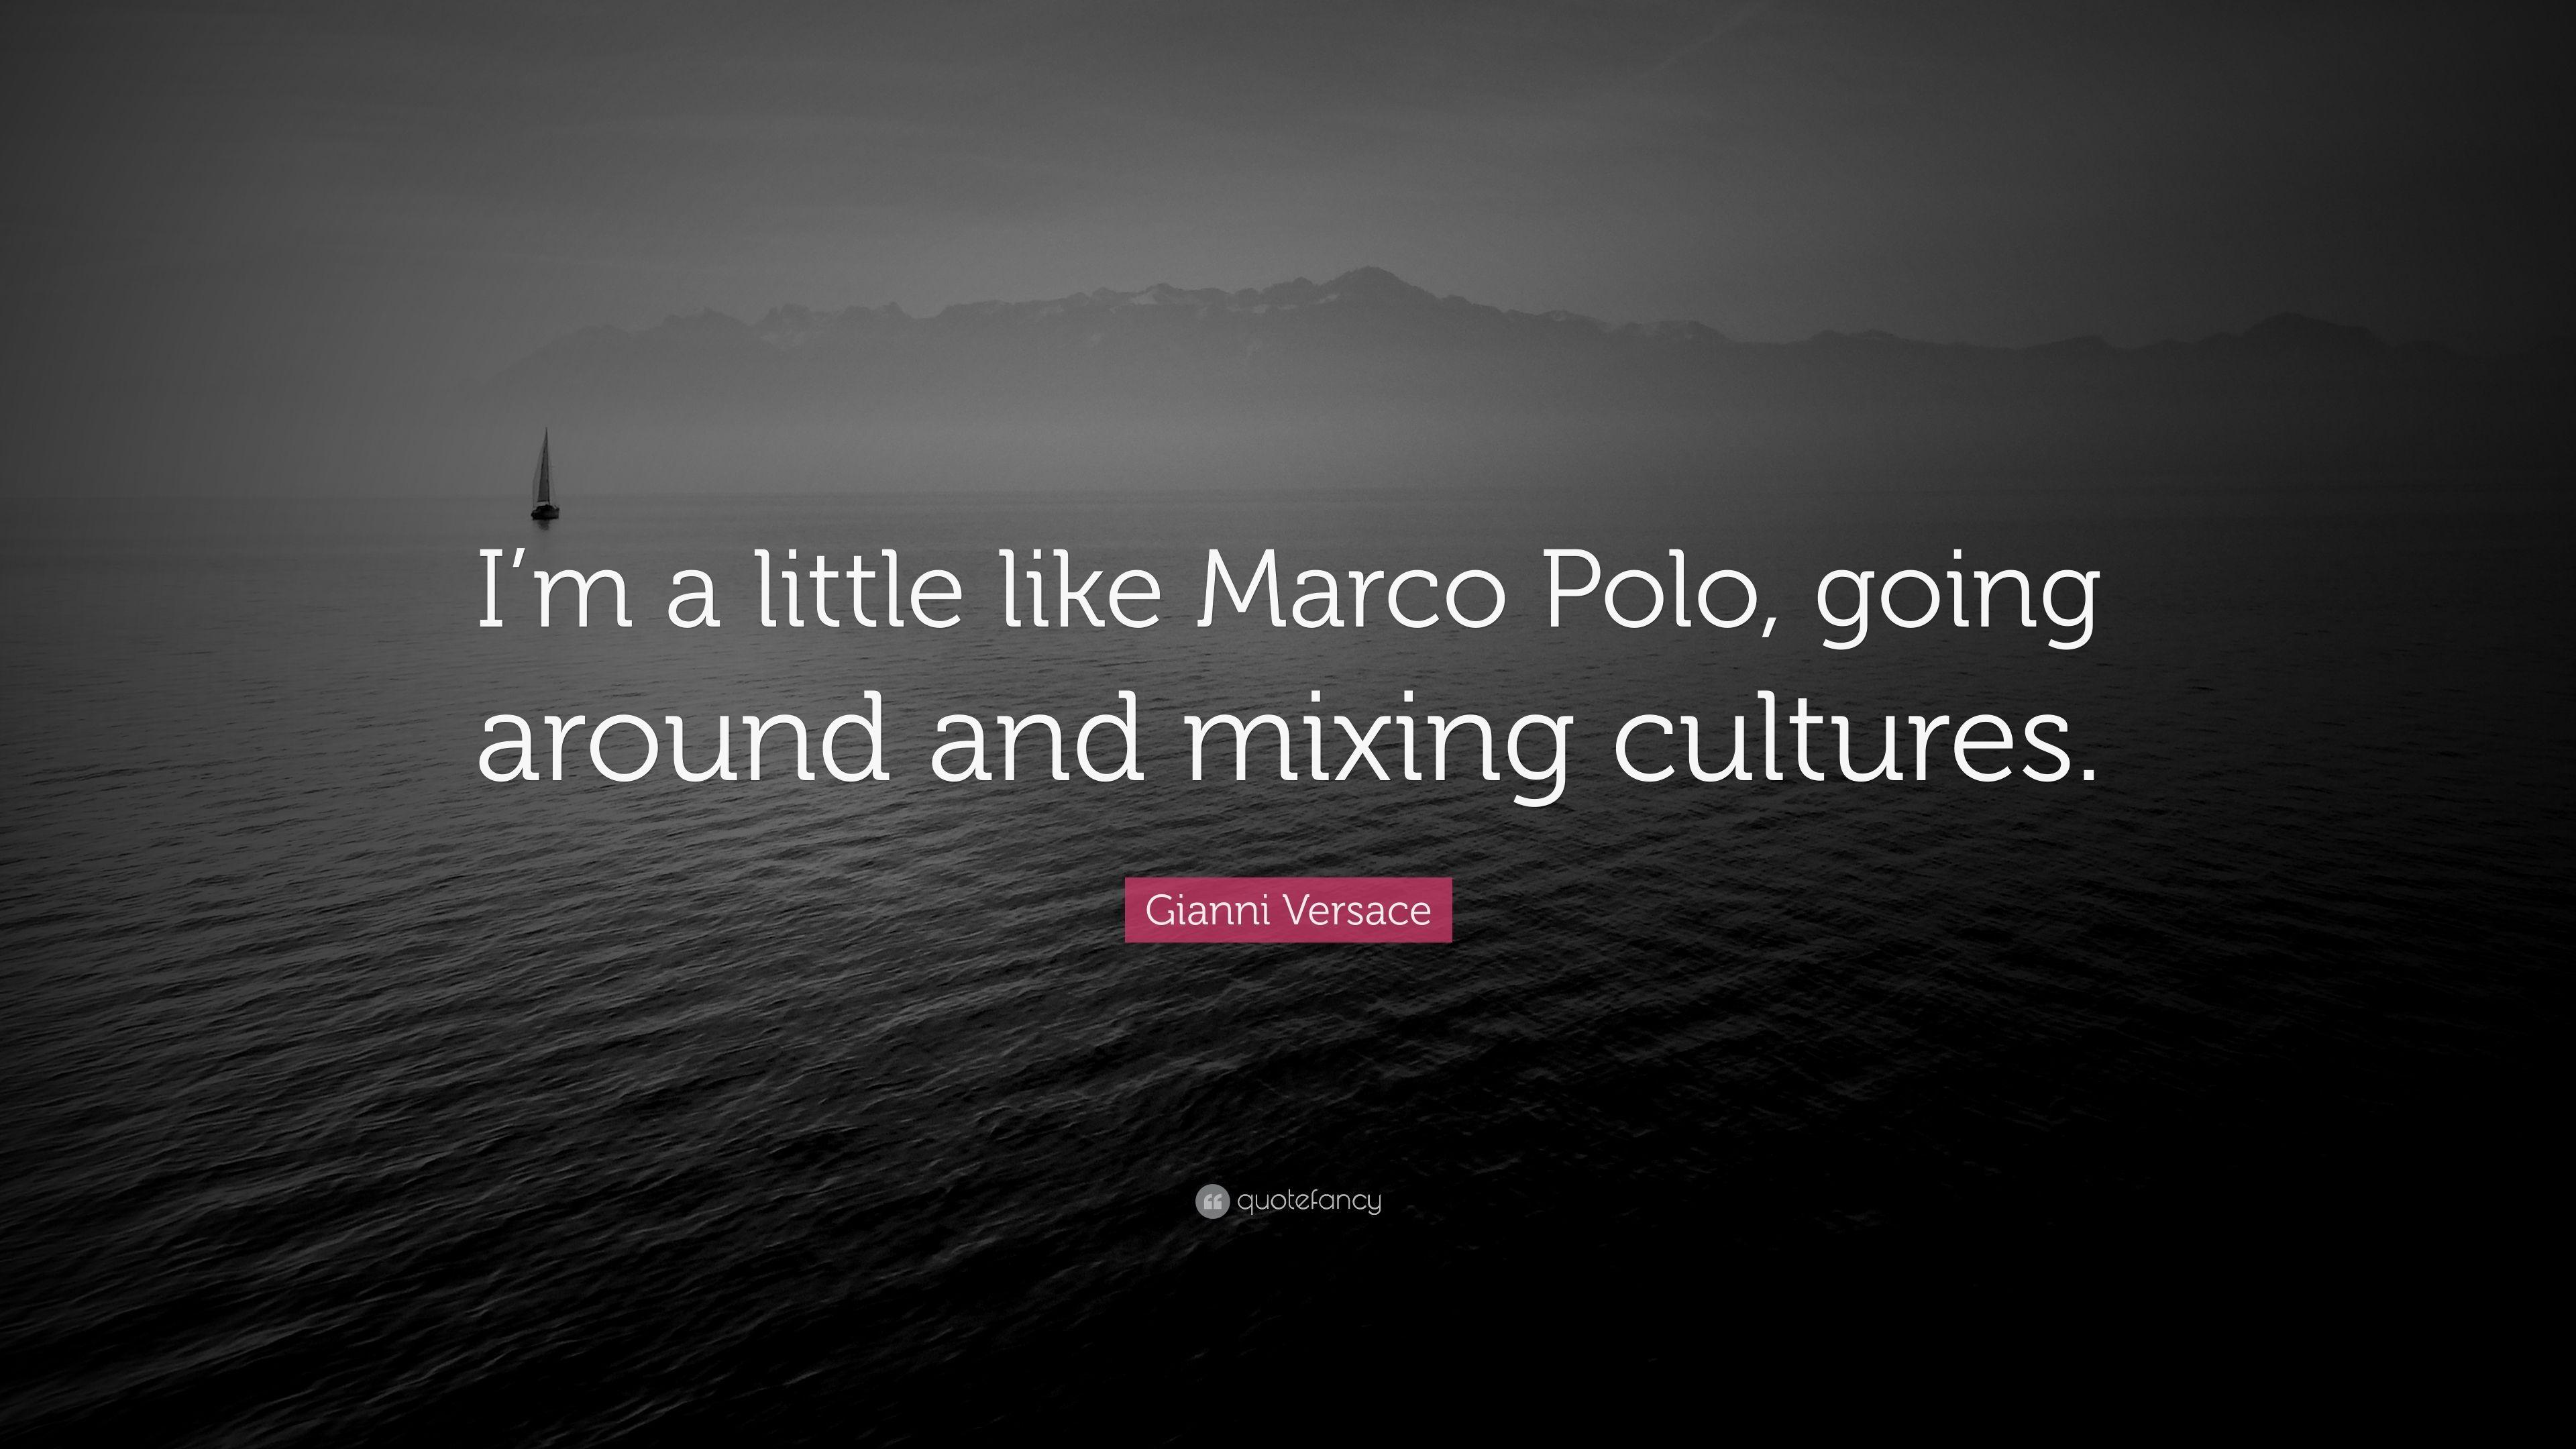 Gianni Versace Quote: “I'm a little like Marco Polo, going around